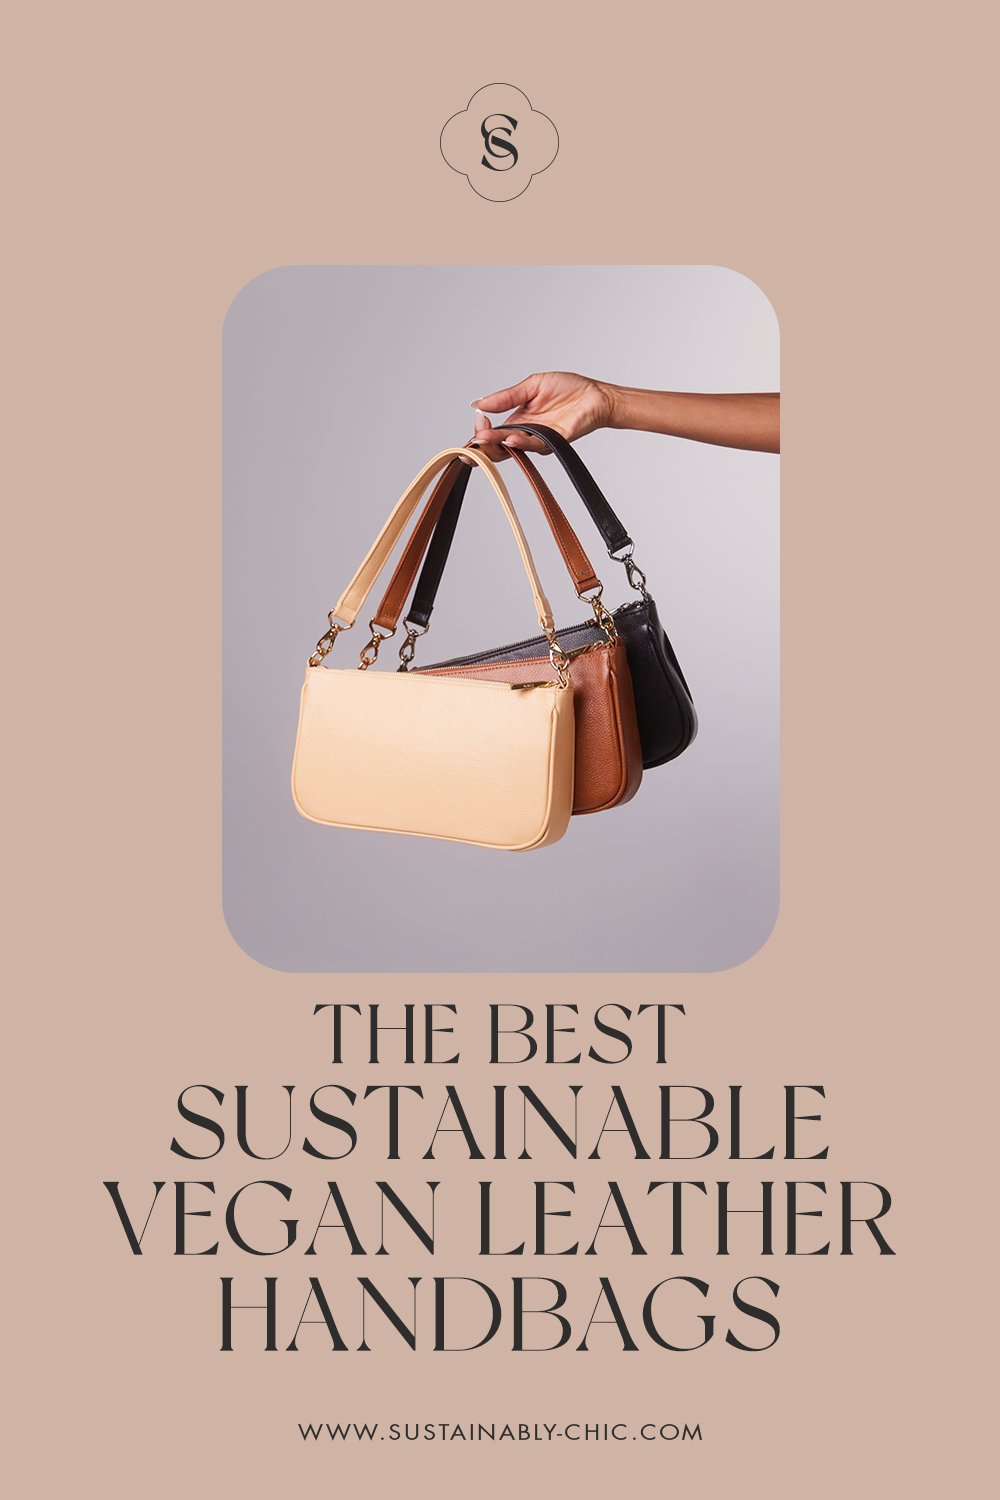 Looking for vegan animal friendly alternatives for leather?